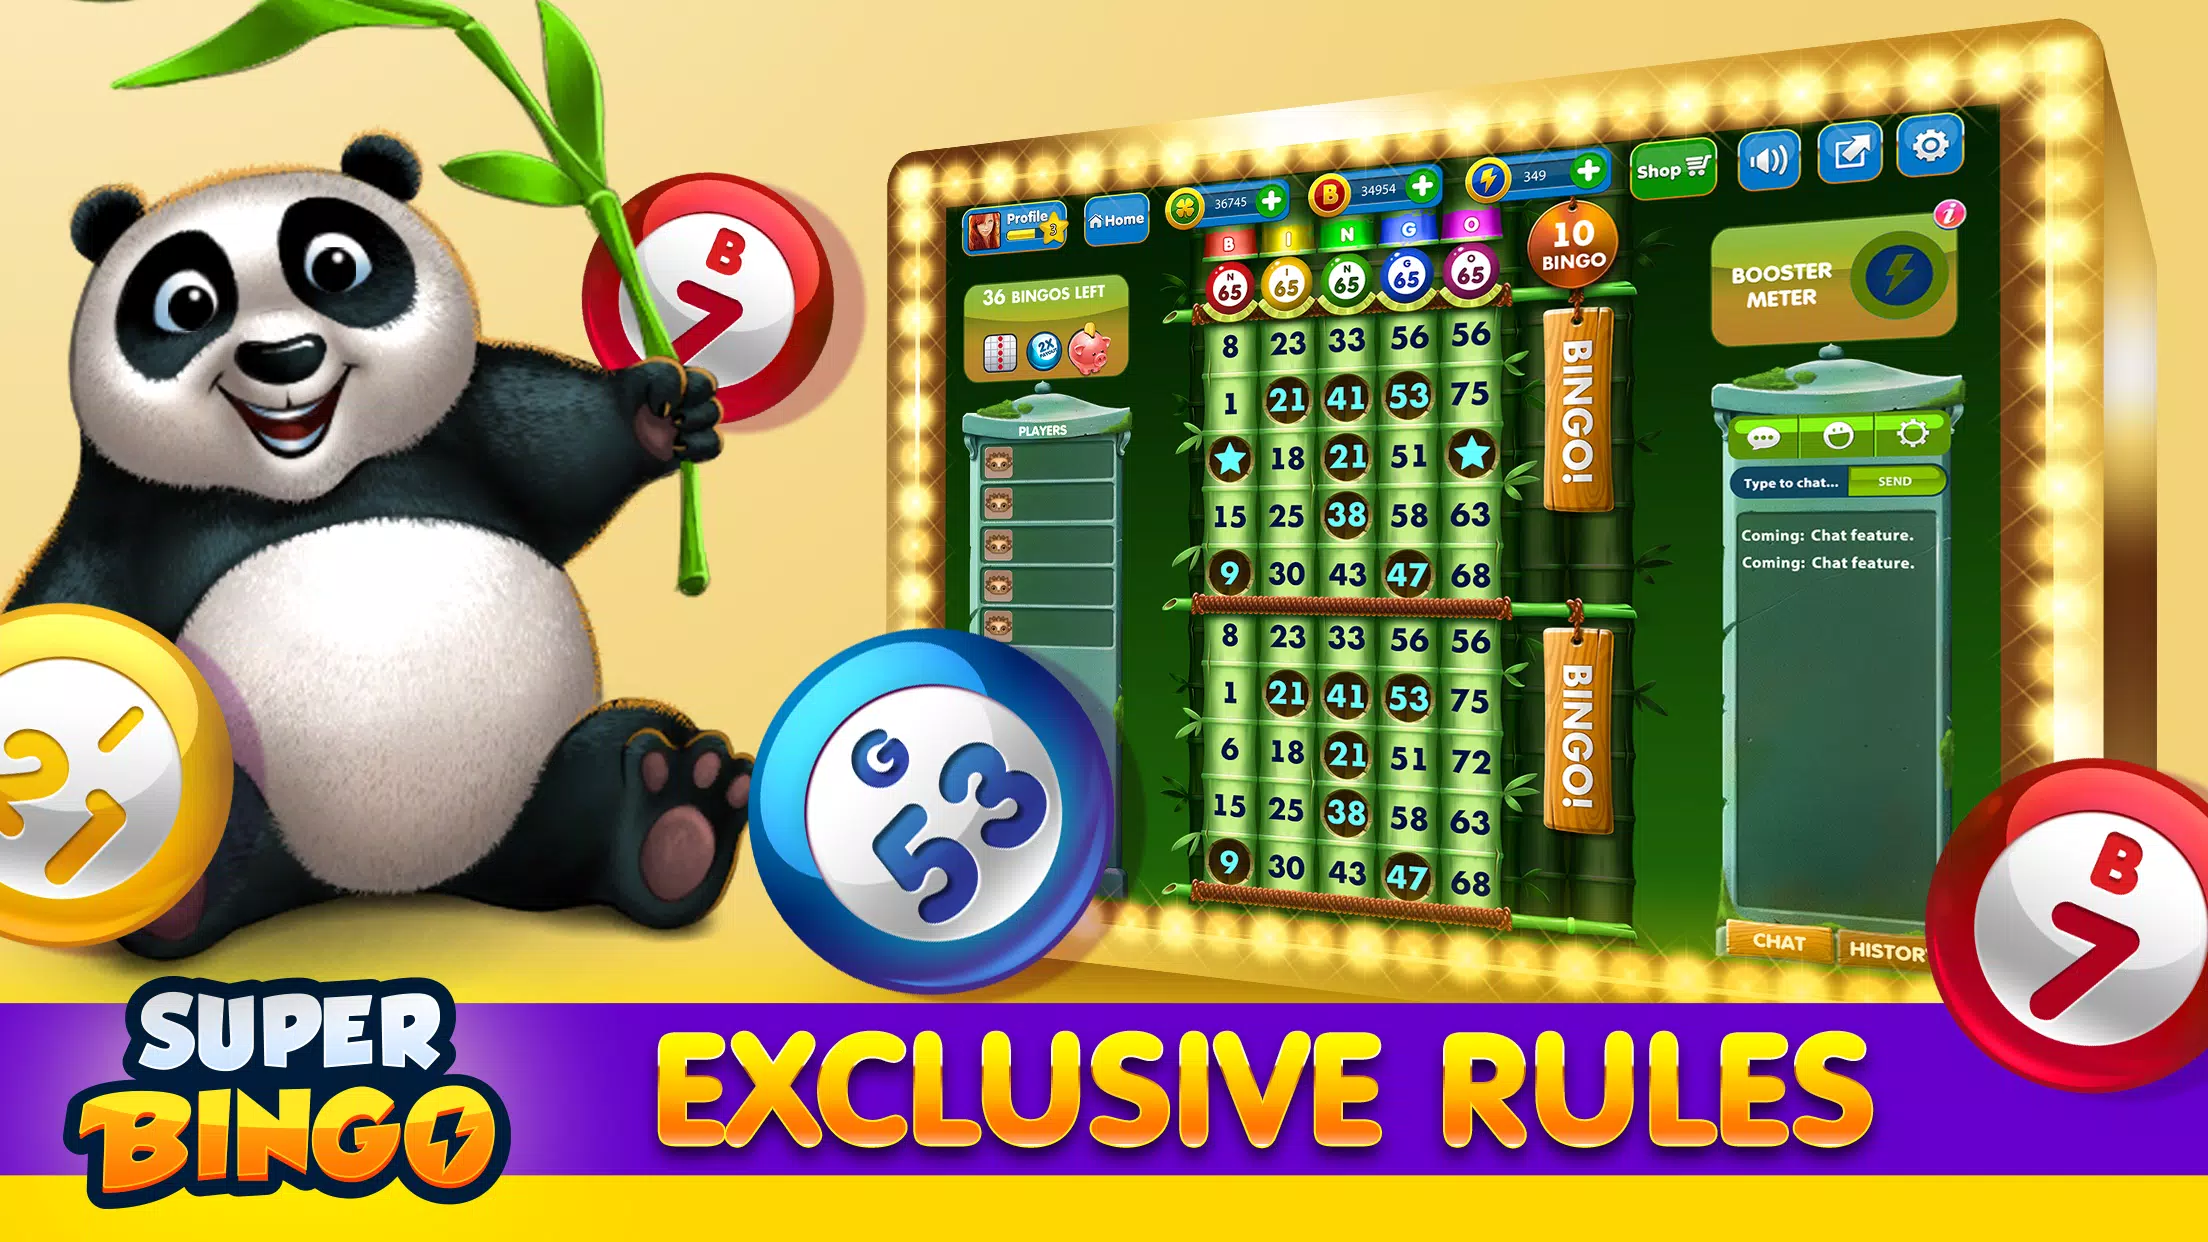 Super Bingo HD for Android - APK Download